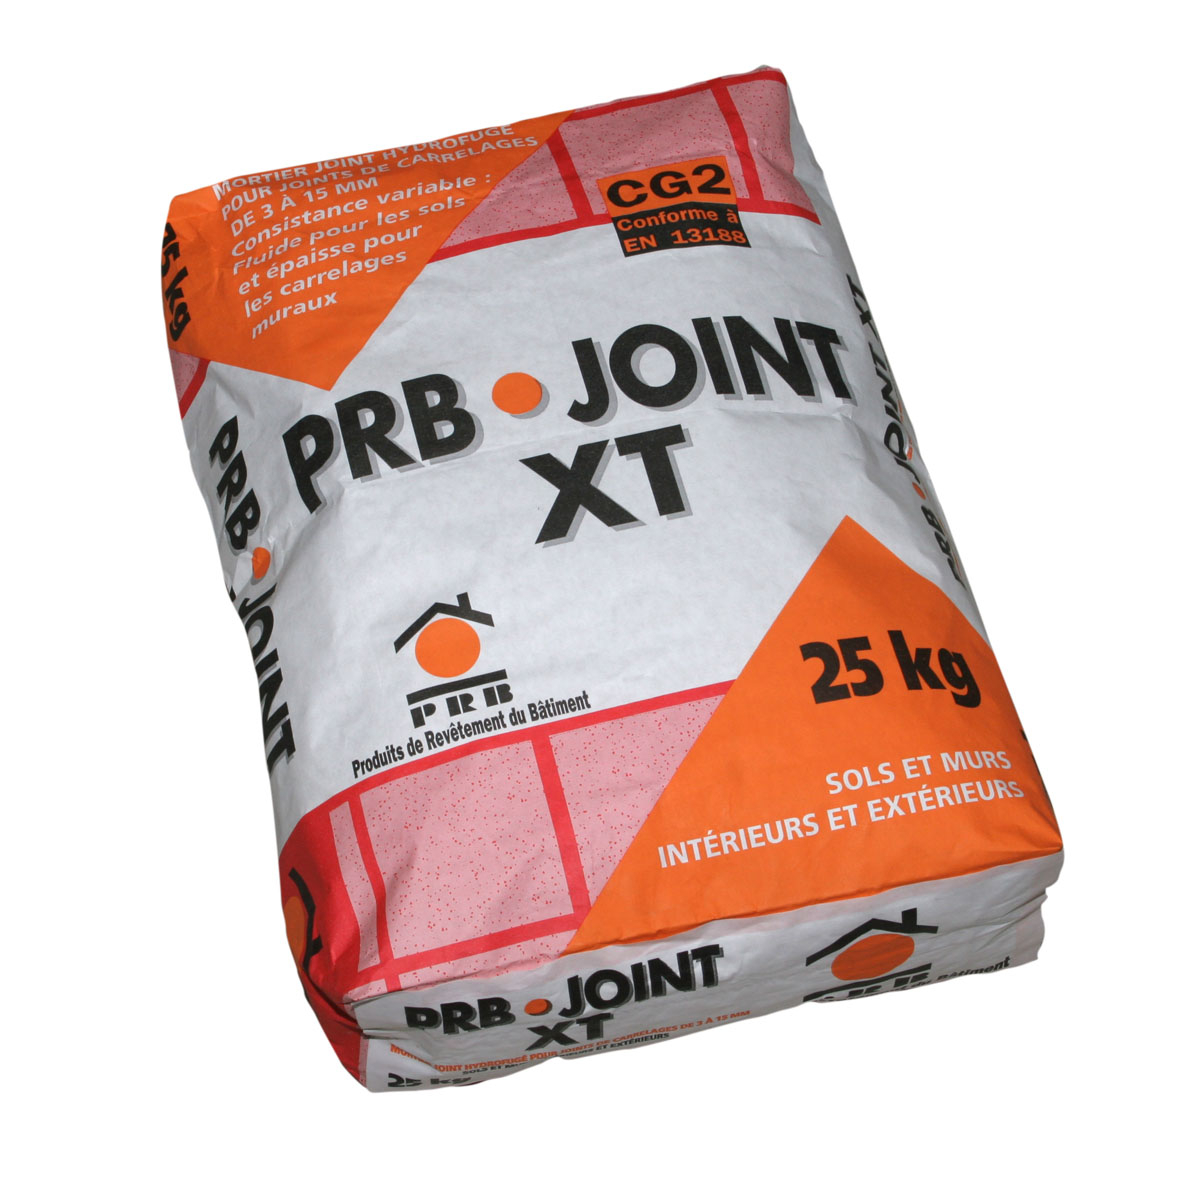 joint-carrelage-prb-joint-xt-25kg-sac-brun-taupe-0